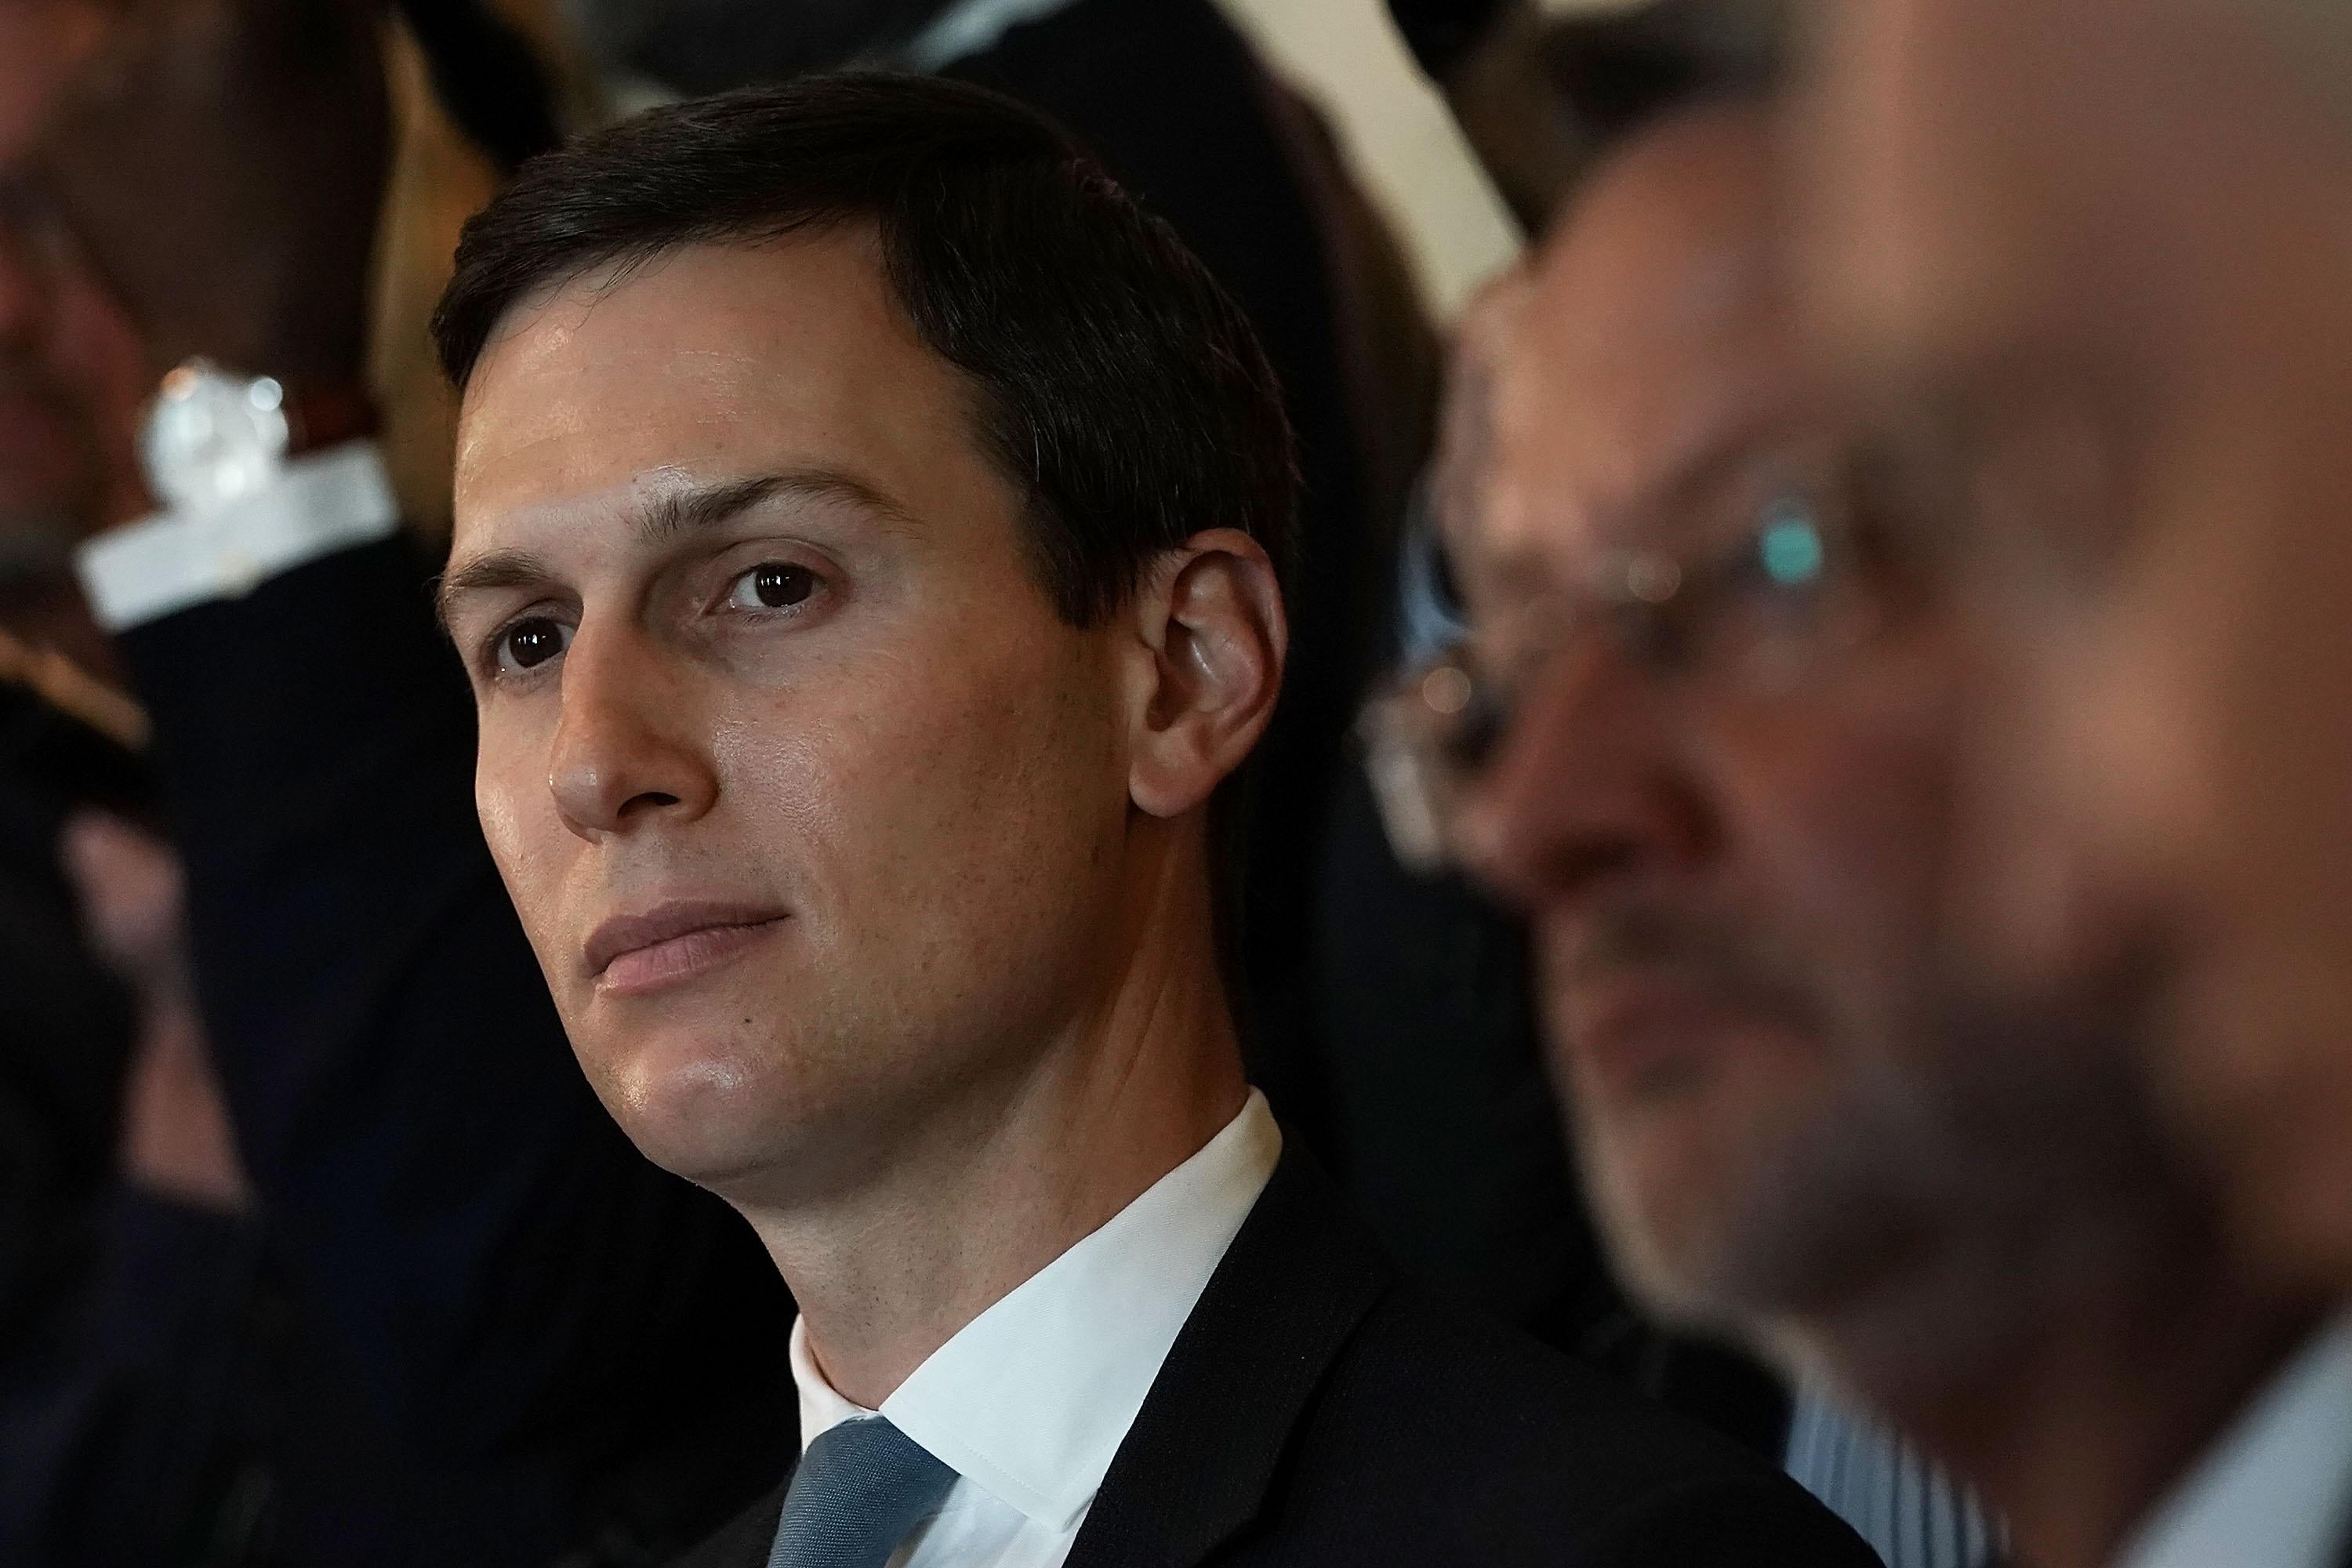 Jared Kushner, White House Senior Adviser and son-in-law of U.S. President Donald Trump, listens during a meeting between President Donald Trump and congressional members in the Cabinet Room of the White House.